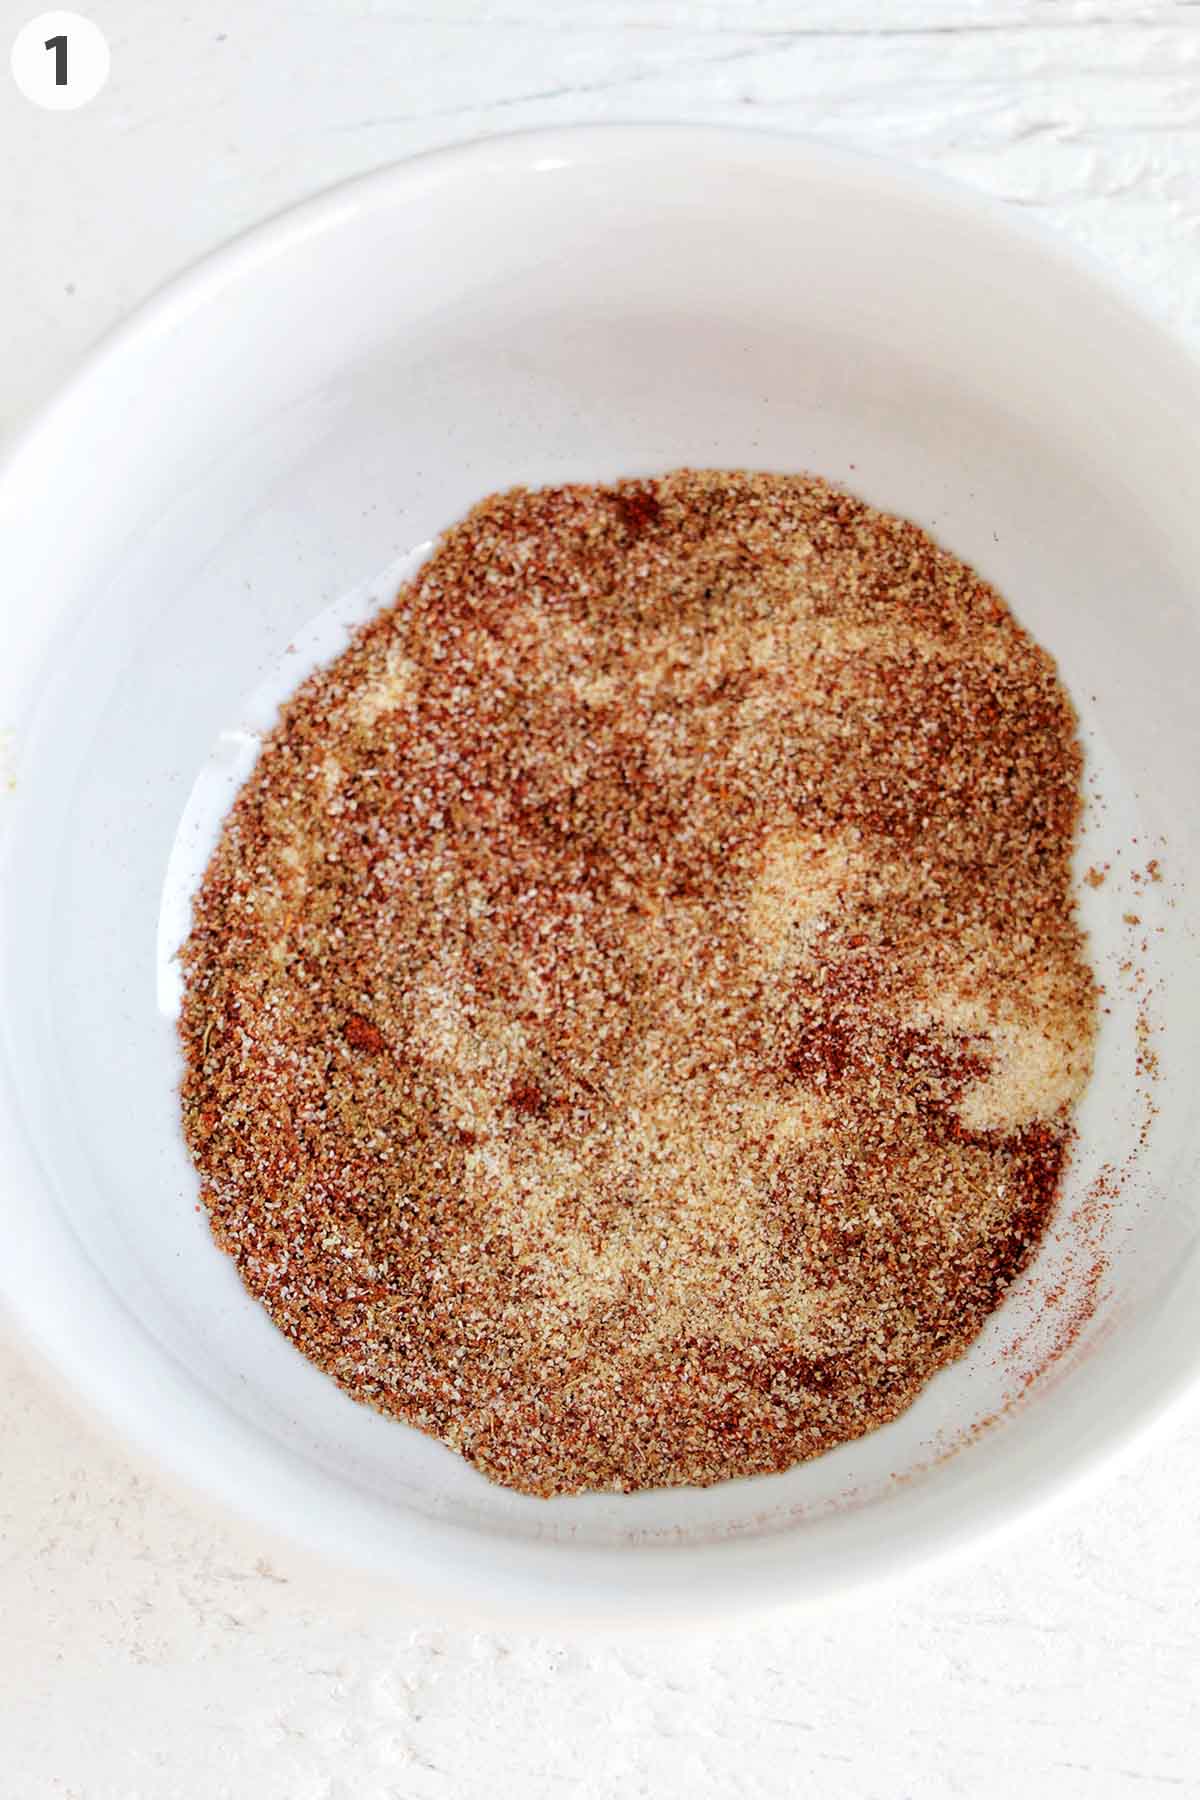 numbered photo showing a bowl of spices.